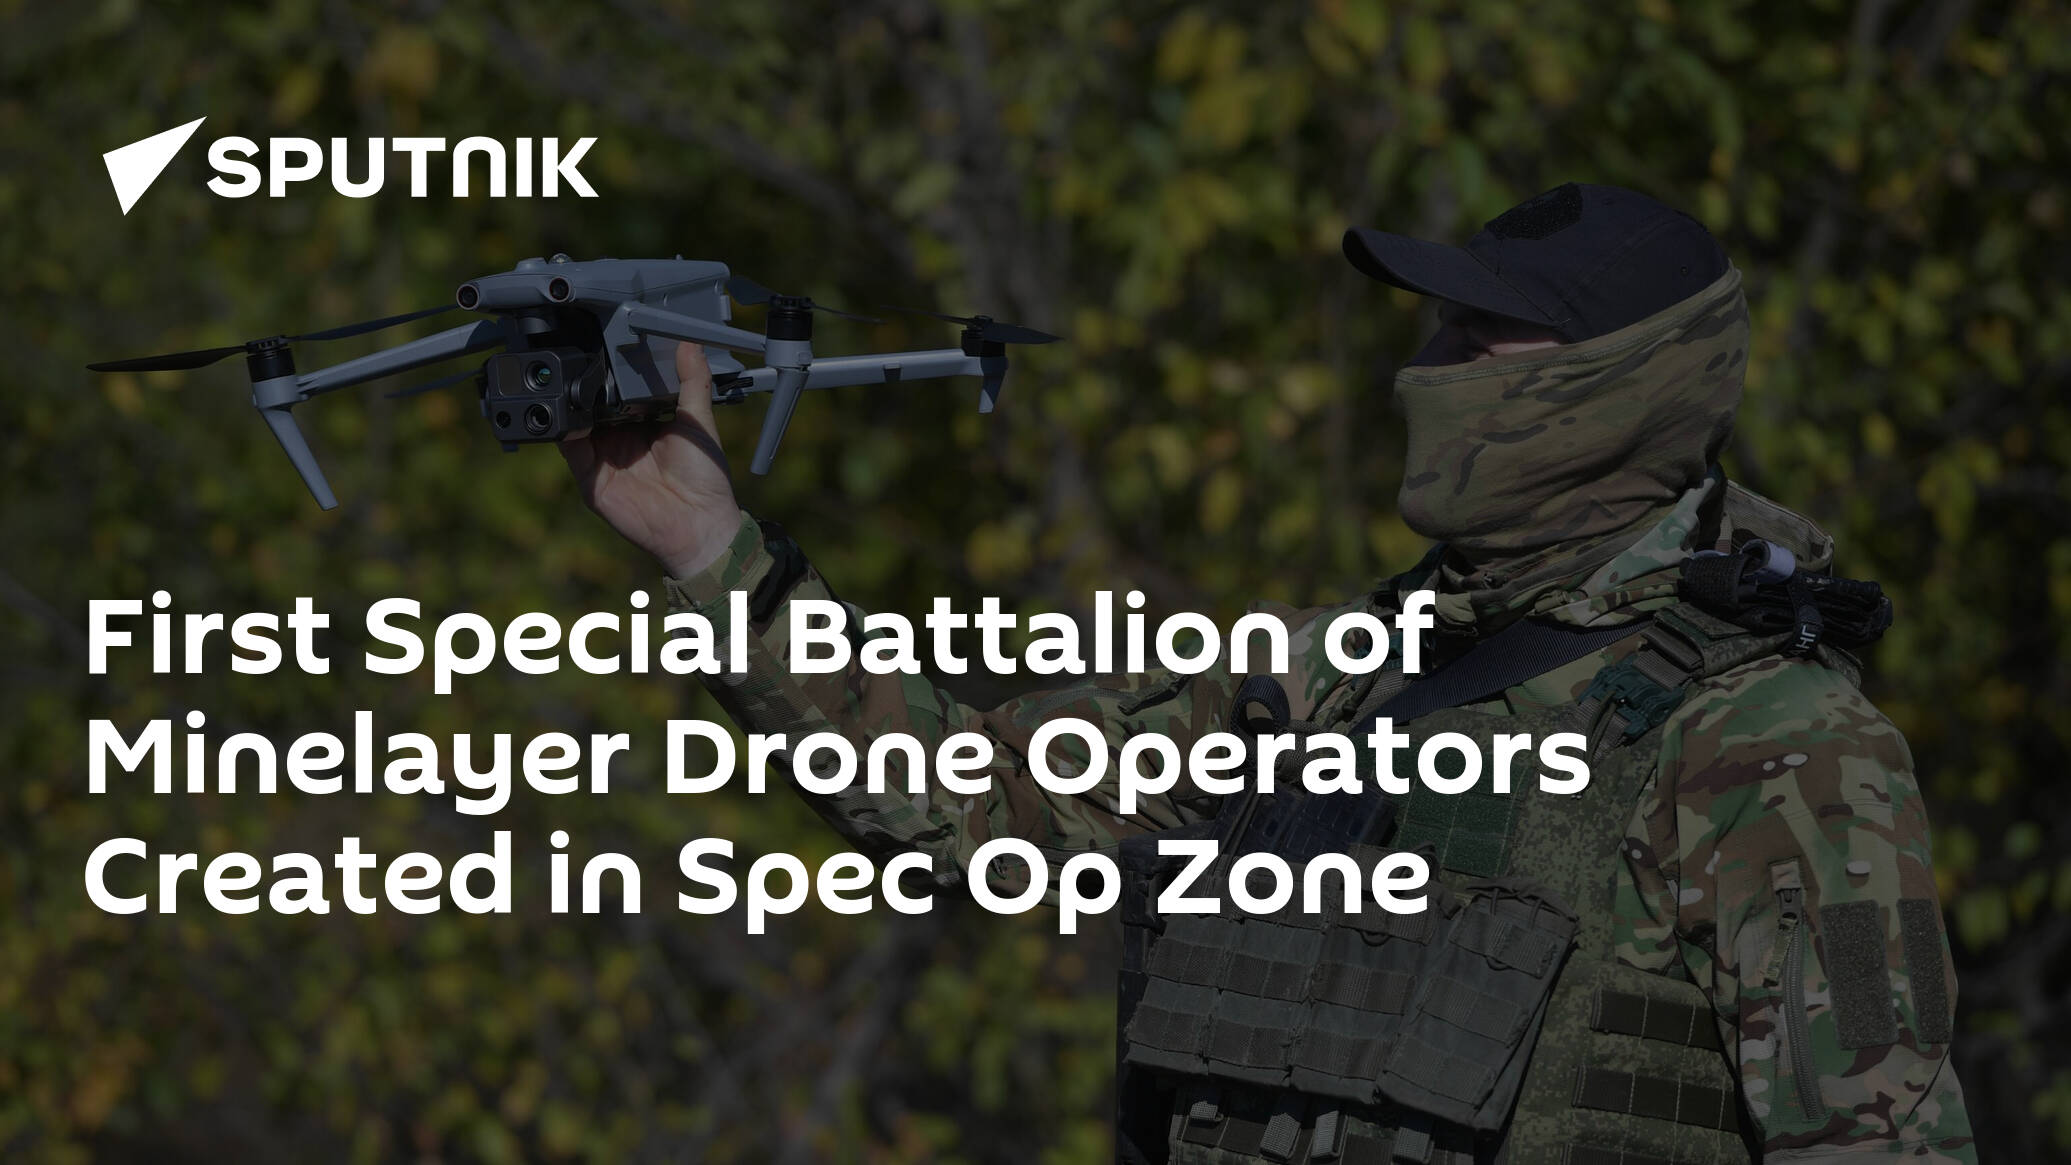 First Special Battalion of Minelayer Drone Operators Created in Spec Op Zone